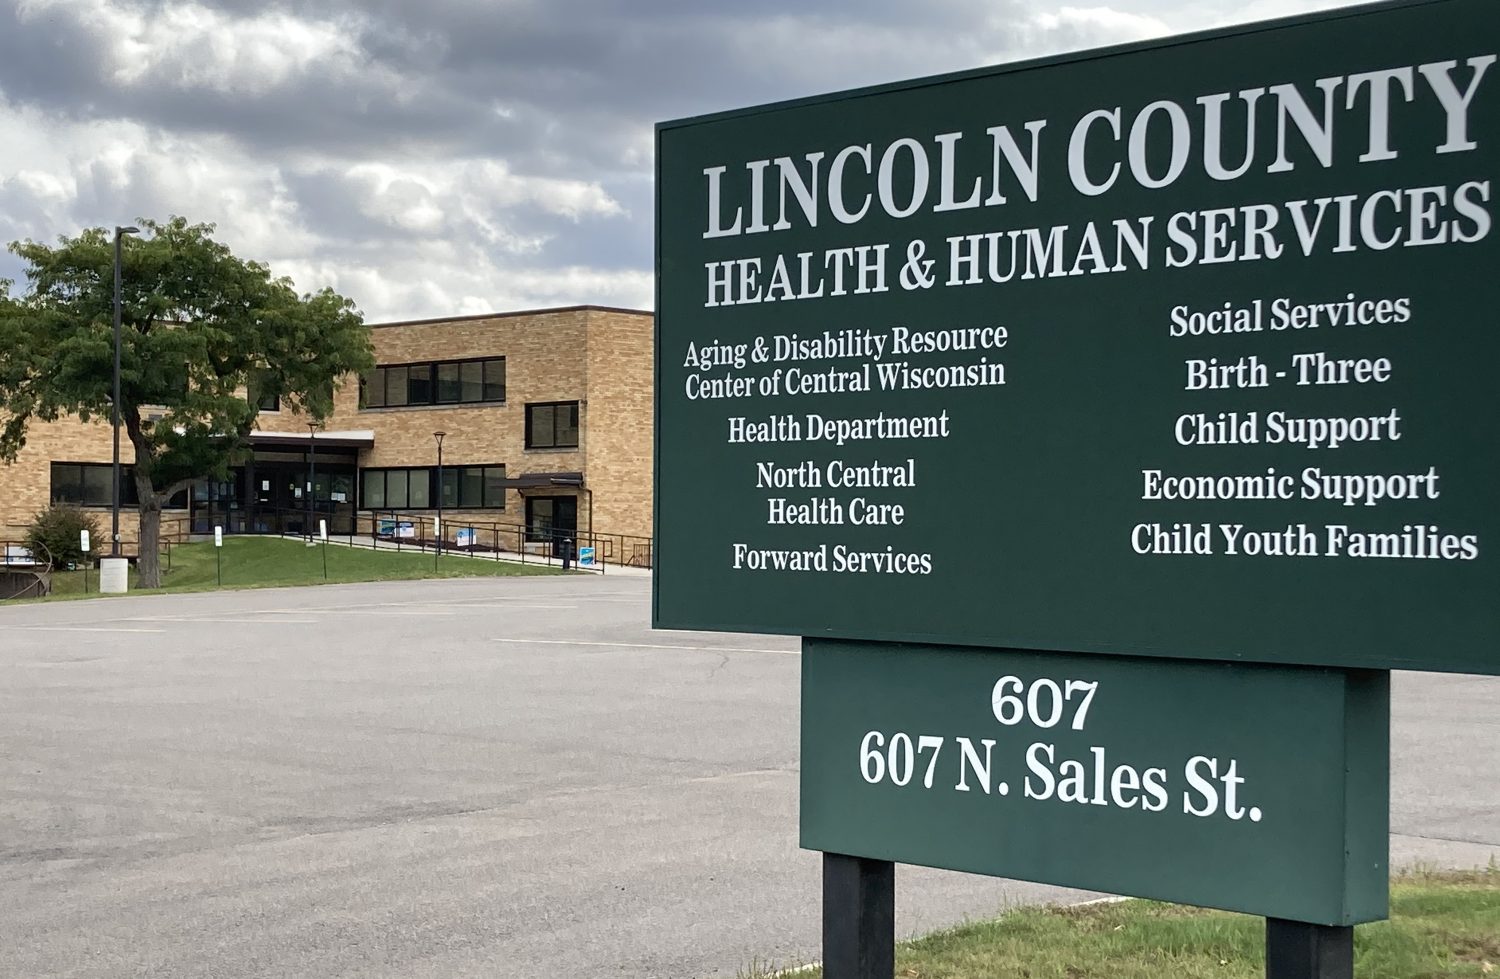 Second COVID-19 related death in Lincoln County